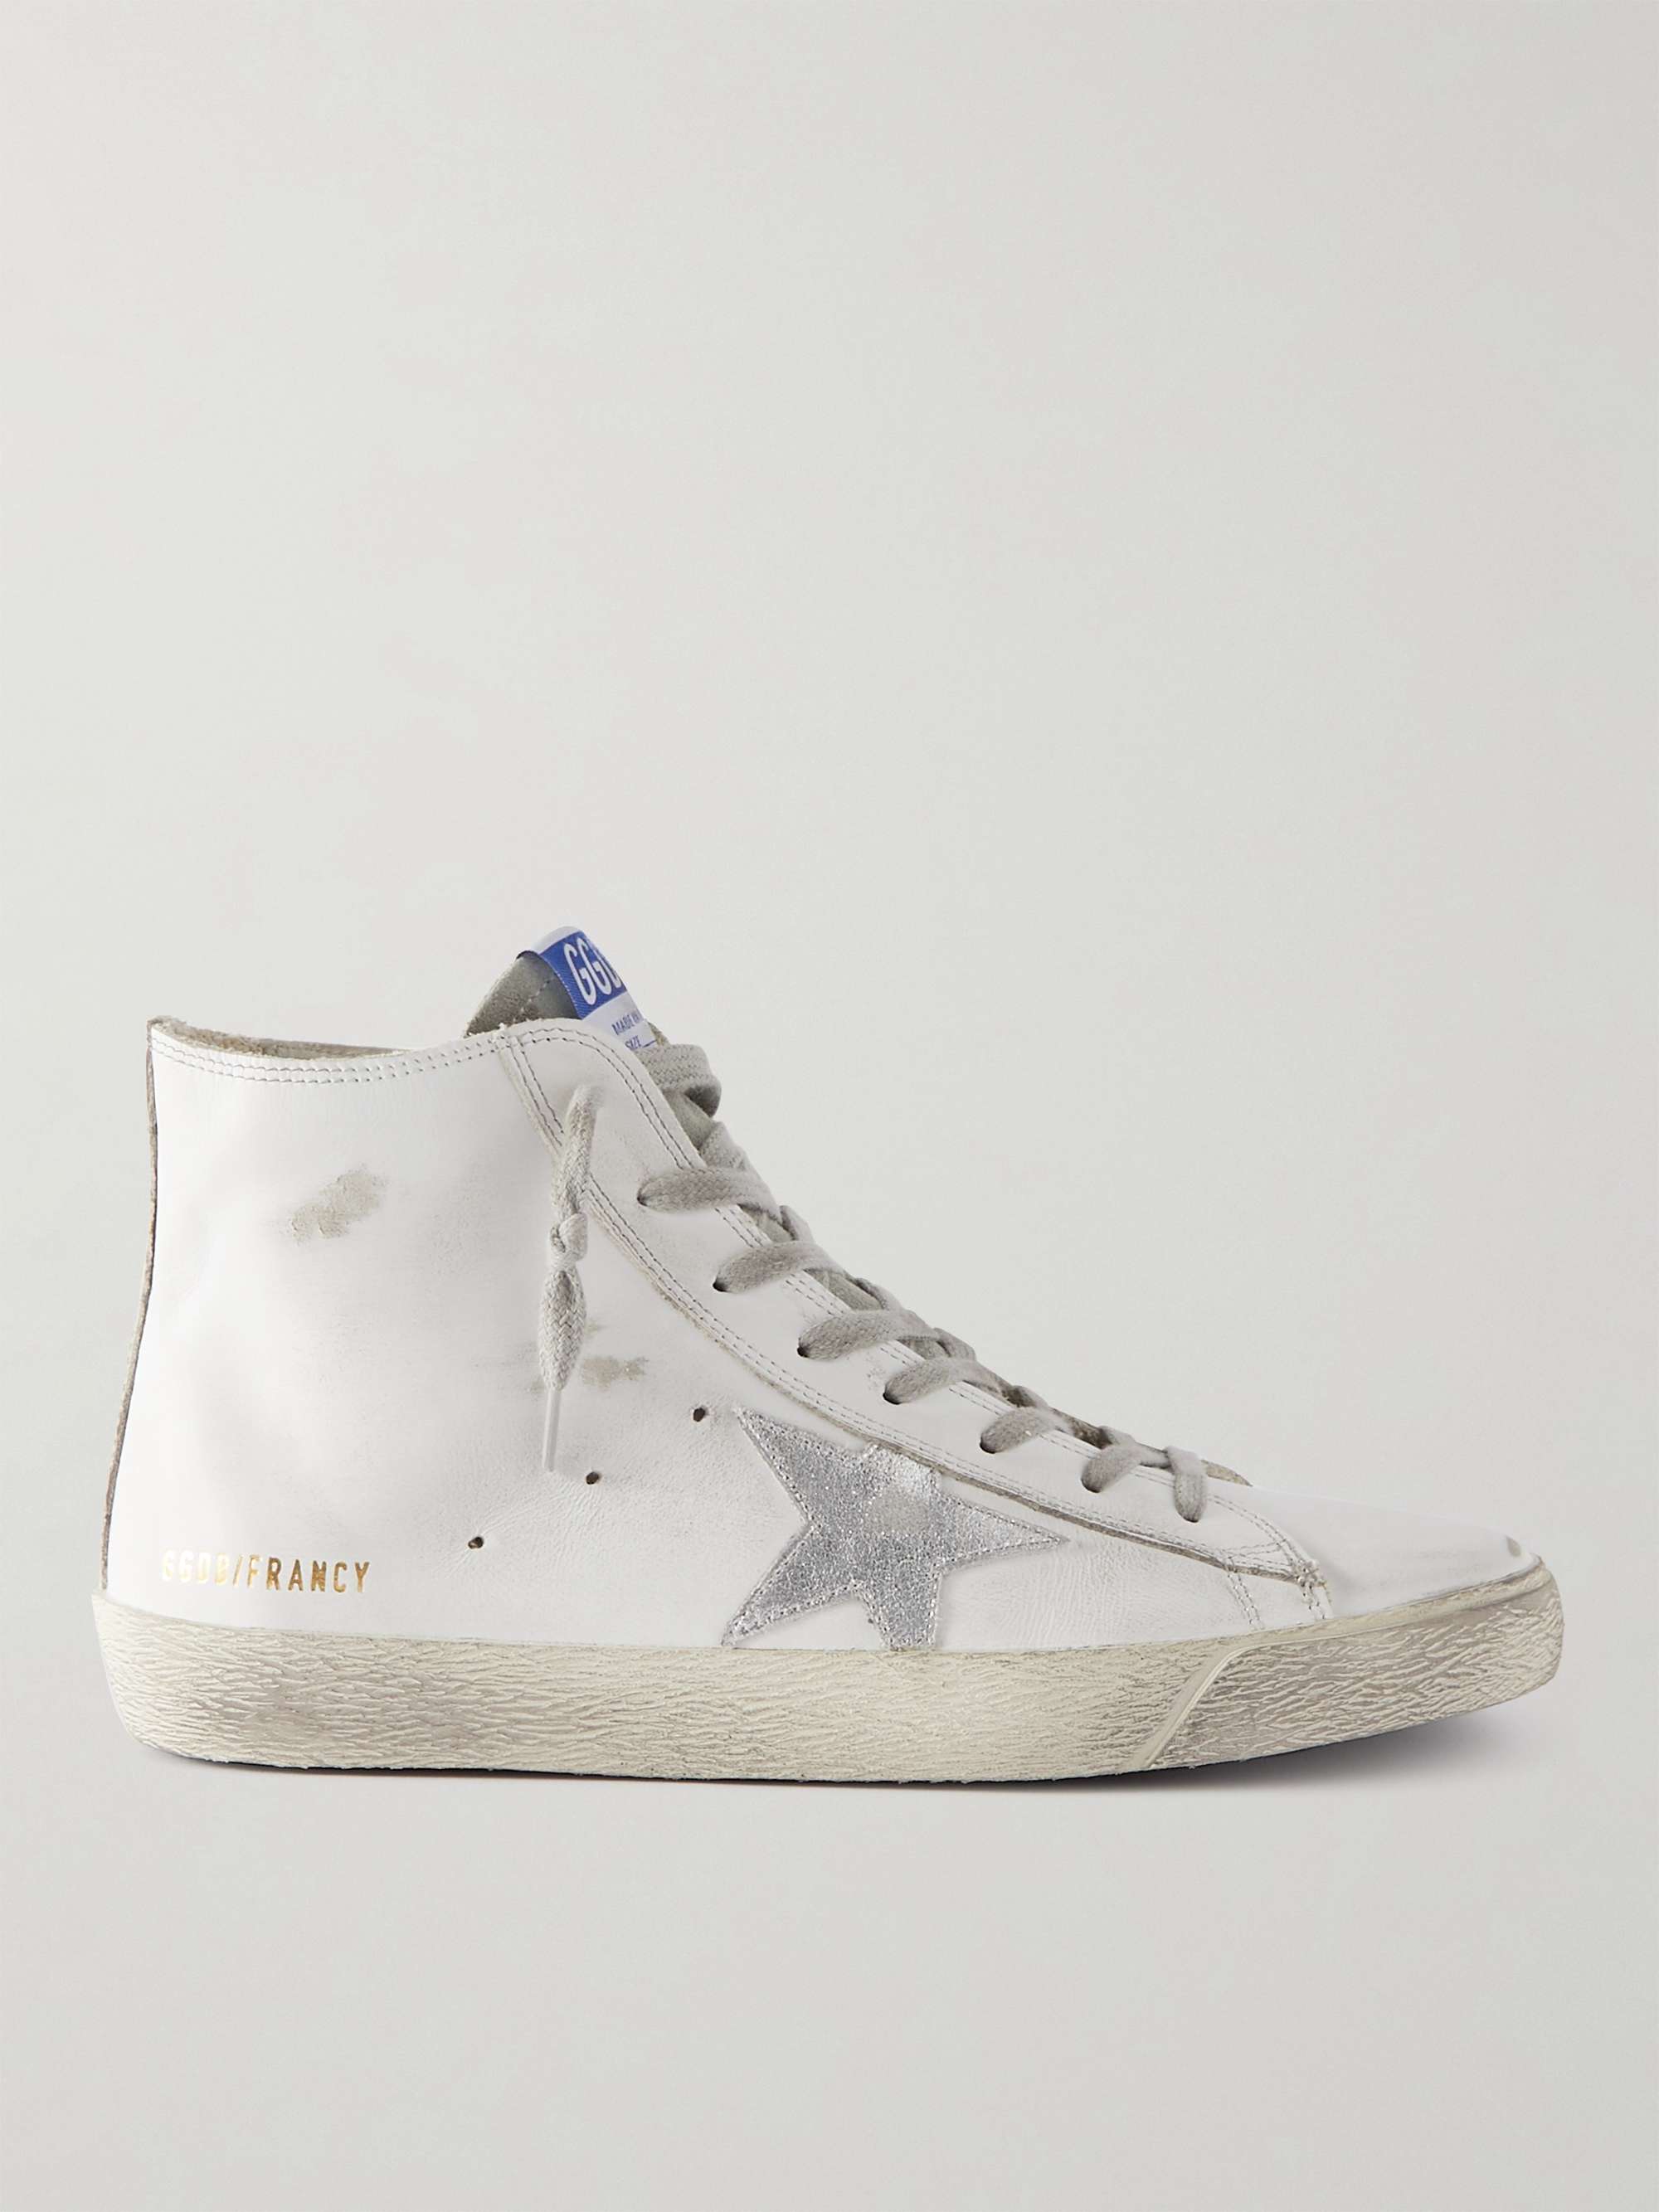 GOLDEN GOOSE DELUXE BRAND Francy Distressed Leather High-Top Sneakers | MR  PORTER